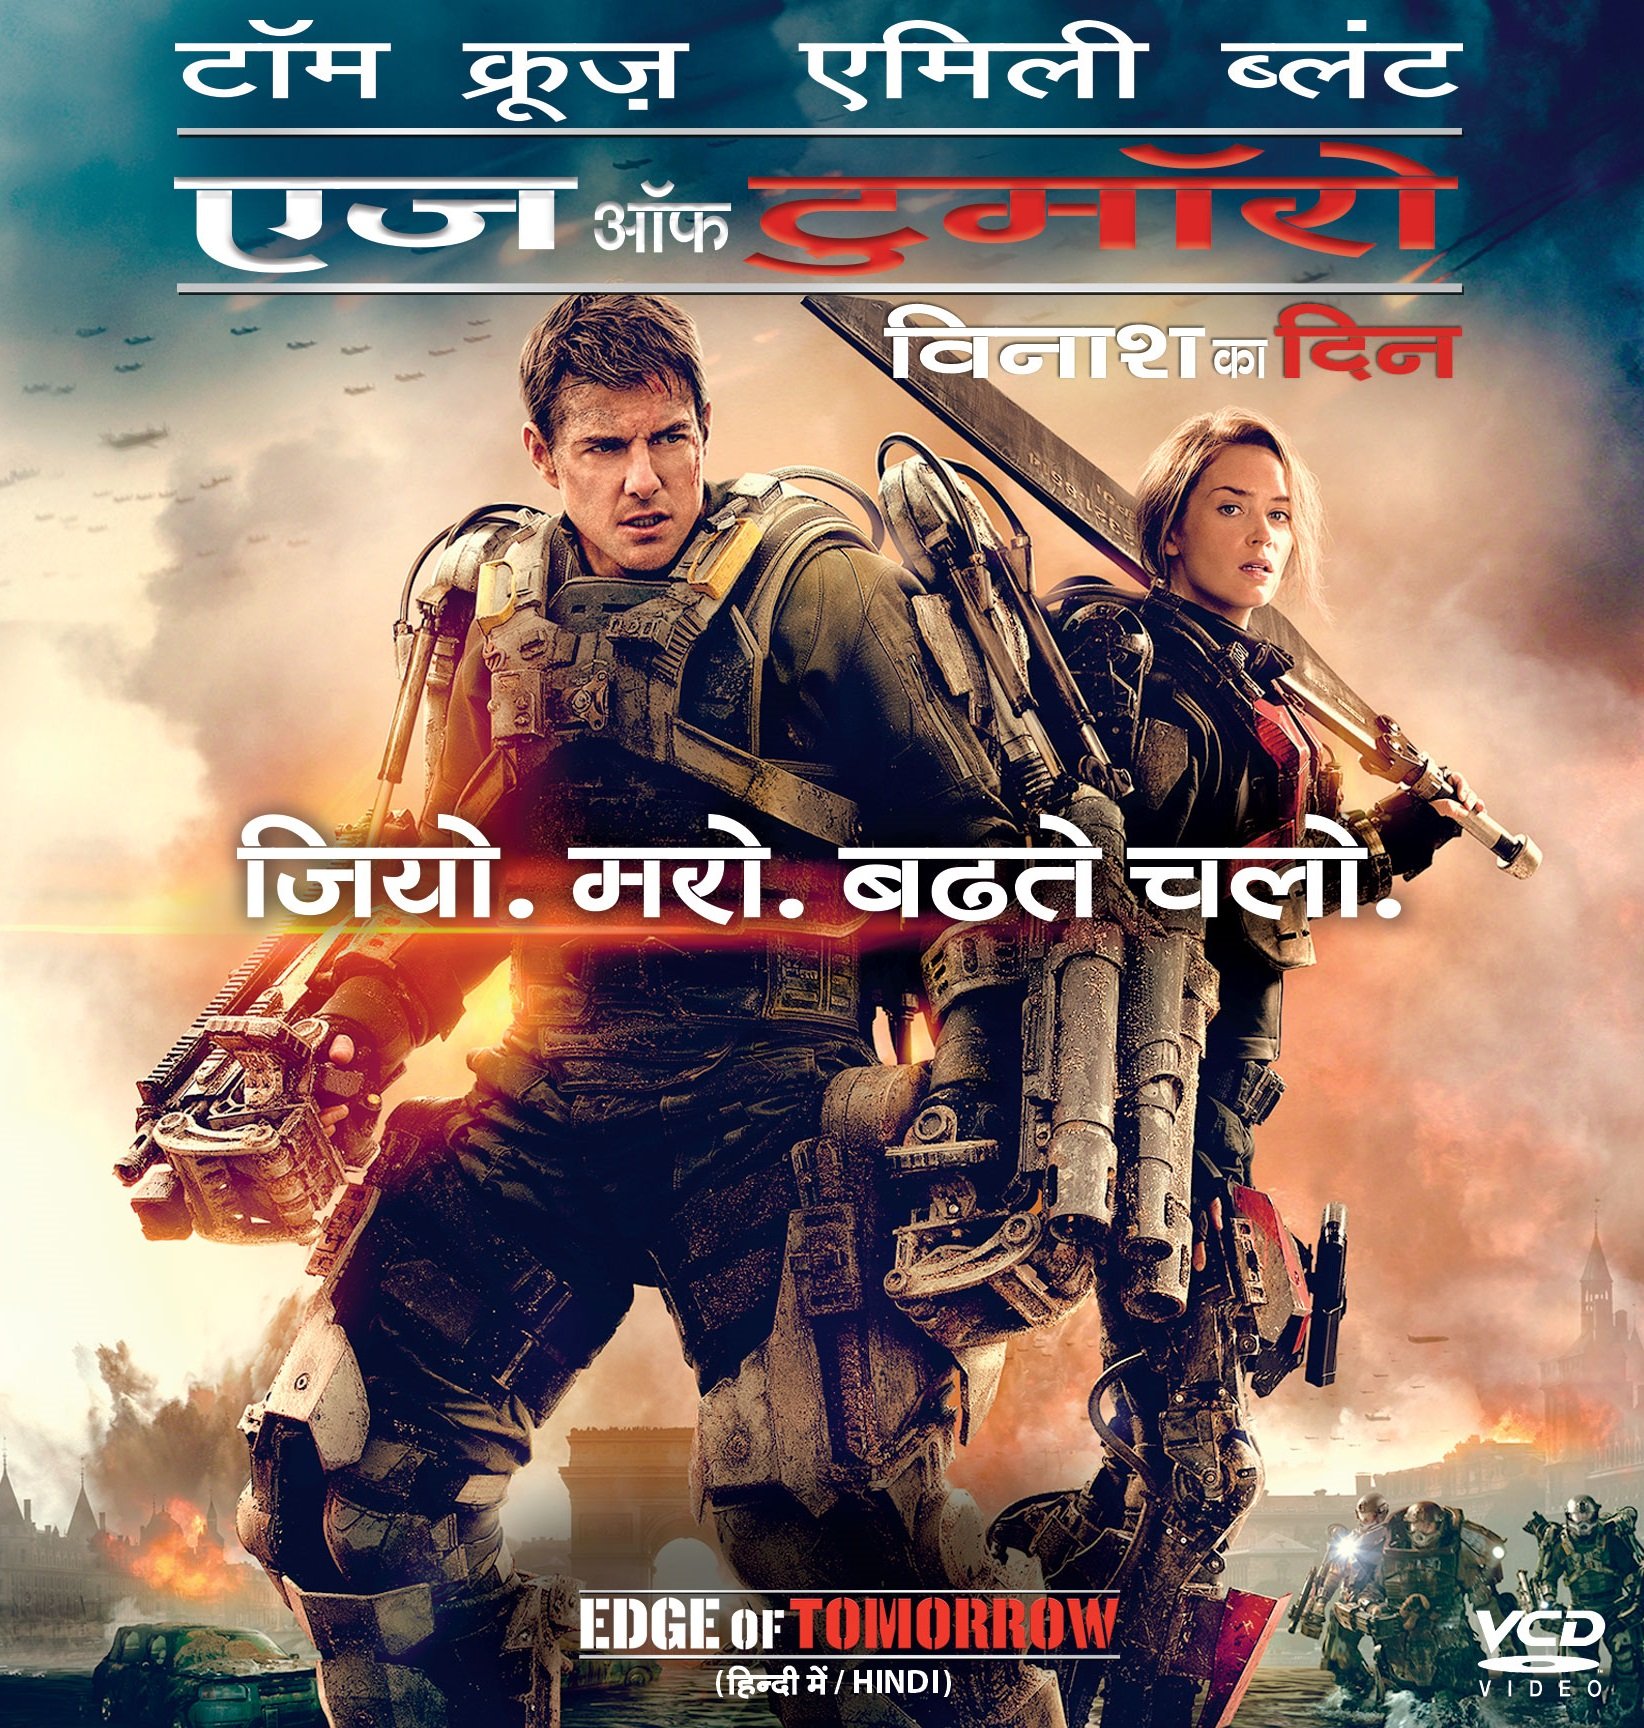 Edge of Tomorrow (Hindi) (2015) online movie details to watch or buy